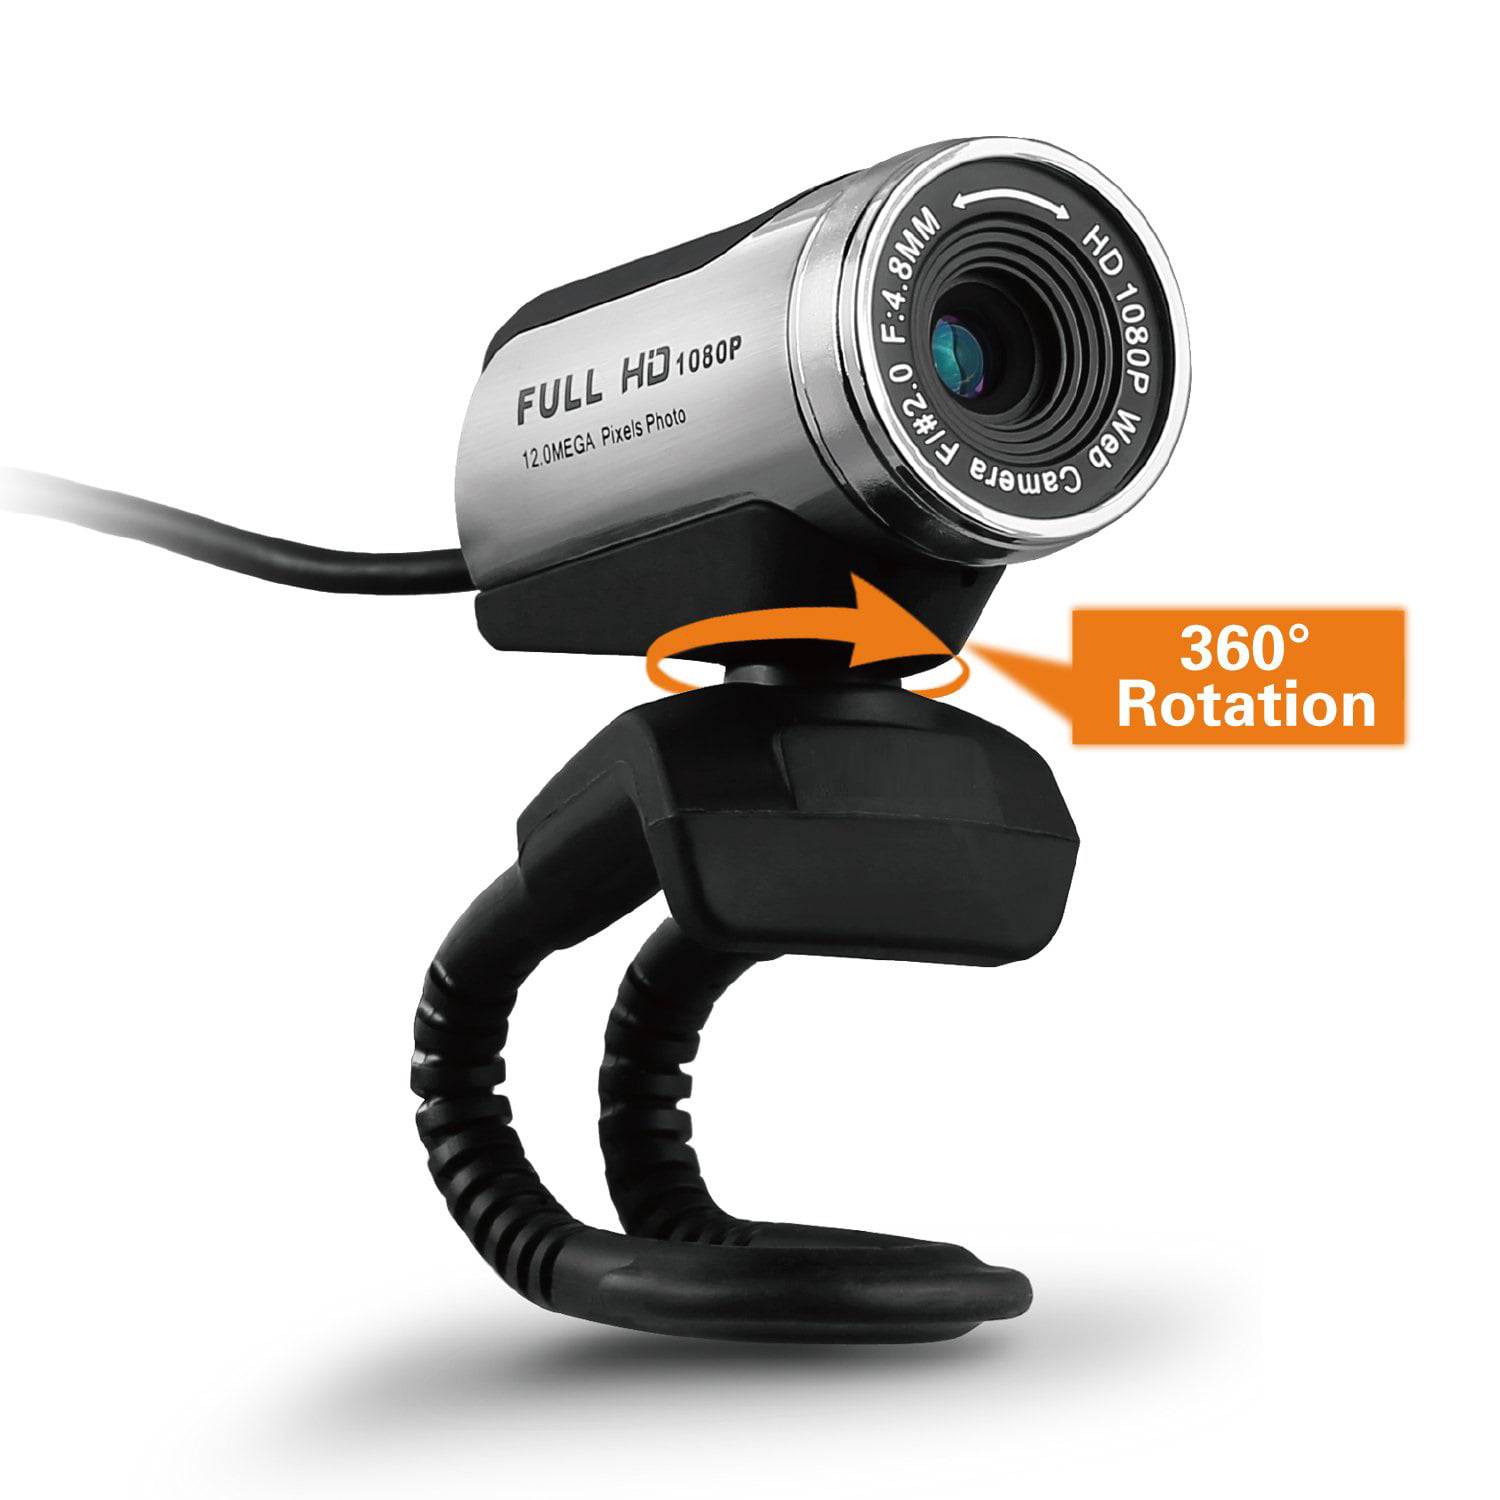 Full HD 1080p Webcam, USB Webcam with Microphone, Computer Laptop Camera, Compatible Mac OS Windows 10/8/7 -